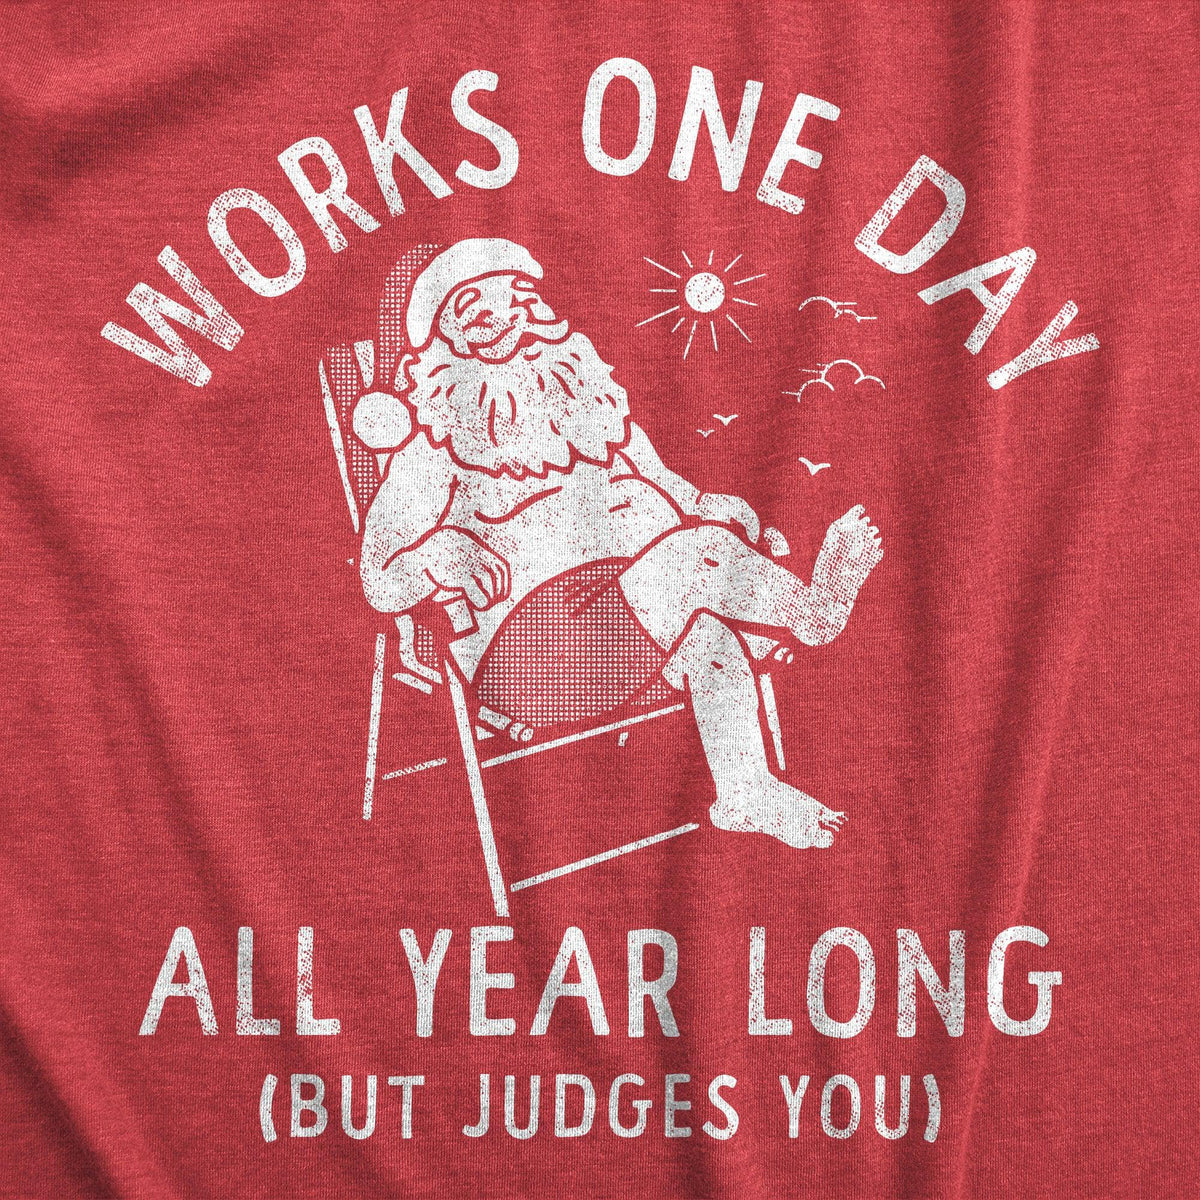 Works One Day All Year Long Women&#39;s Tshirt  -  Crazy Dog T-Shirts